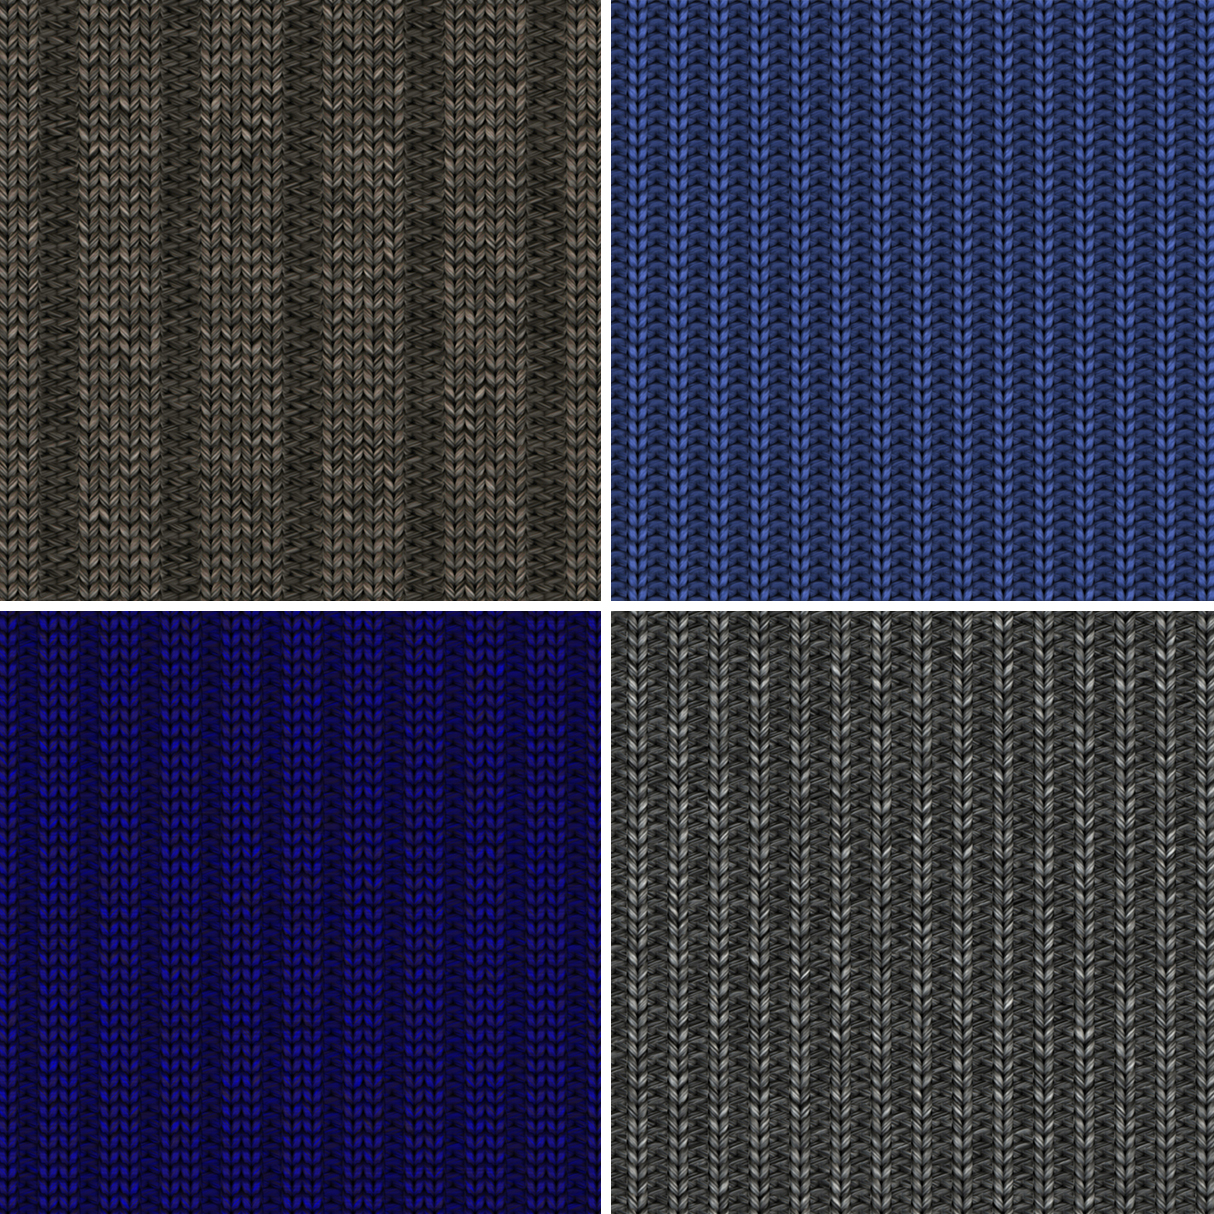 30 Knitted Background Textures Samples Preview – Part 6